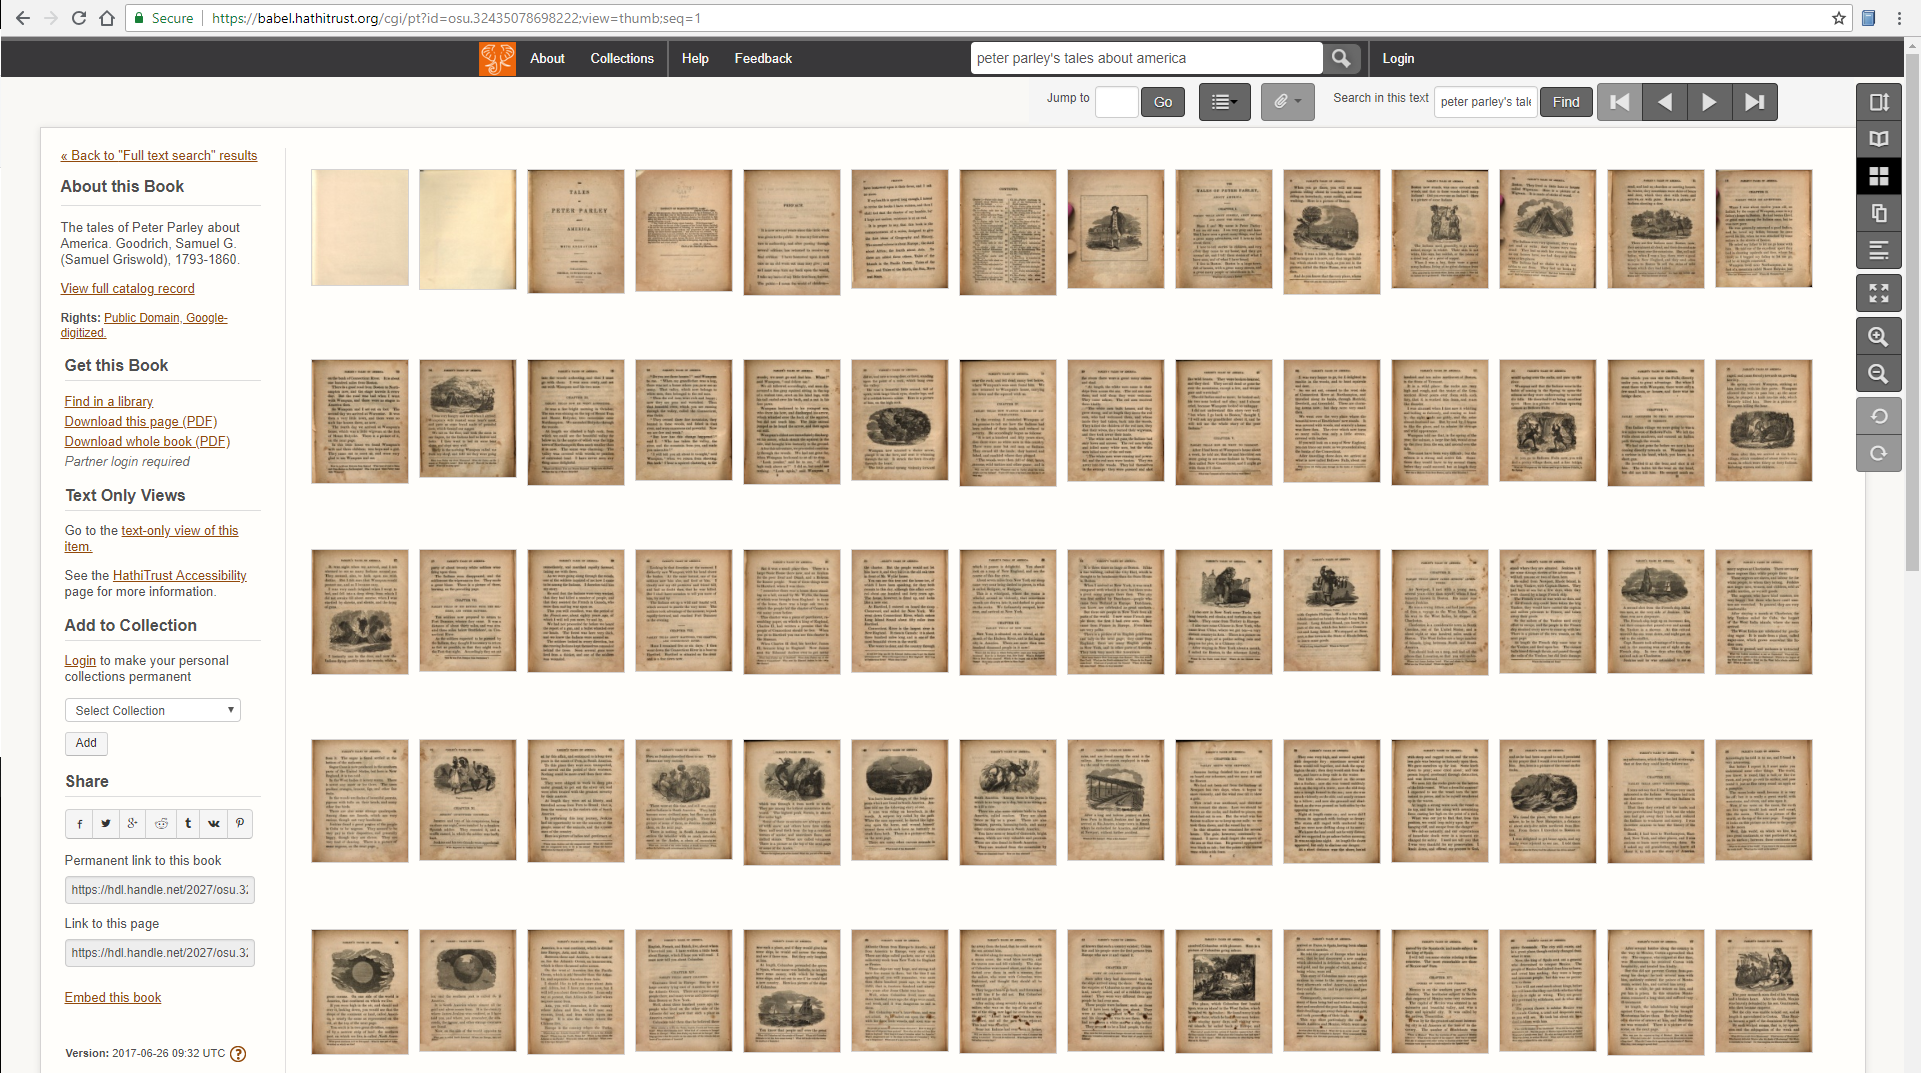 View of HathiTrust thumbnails for all pages.